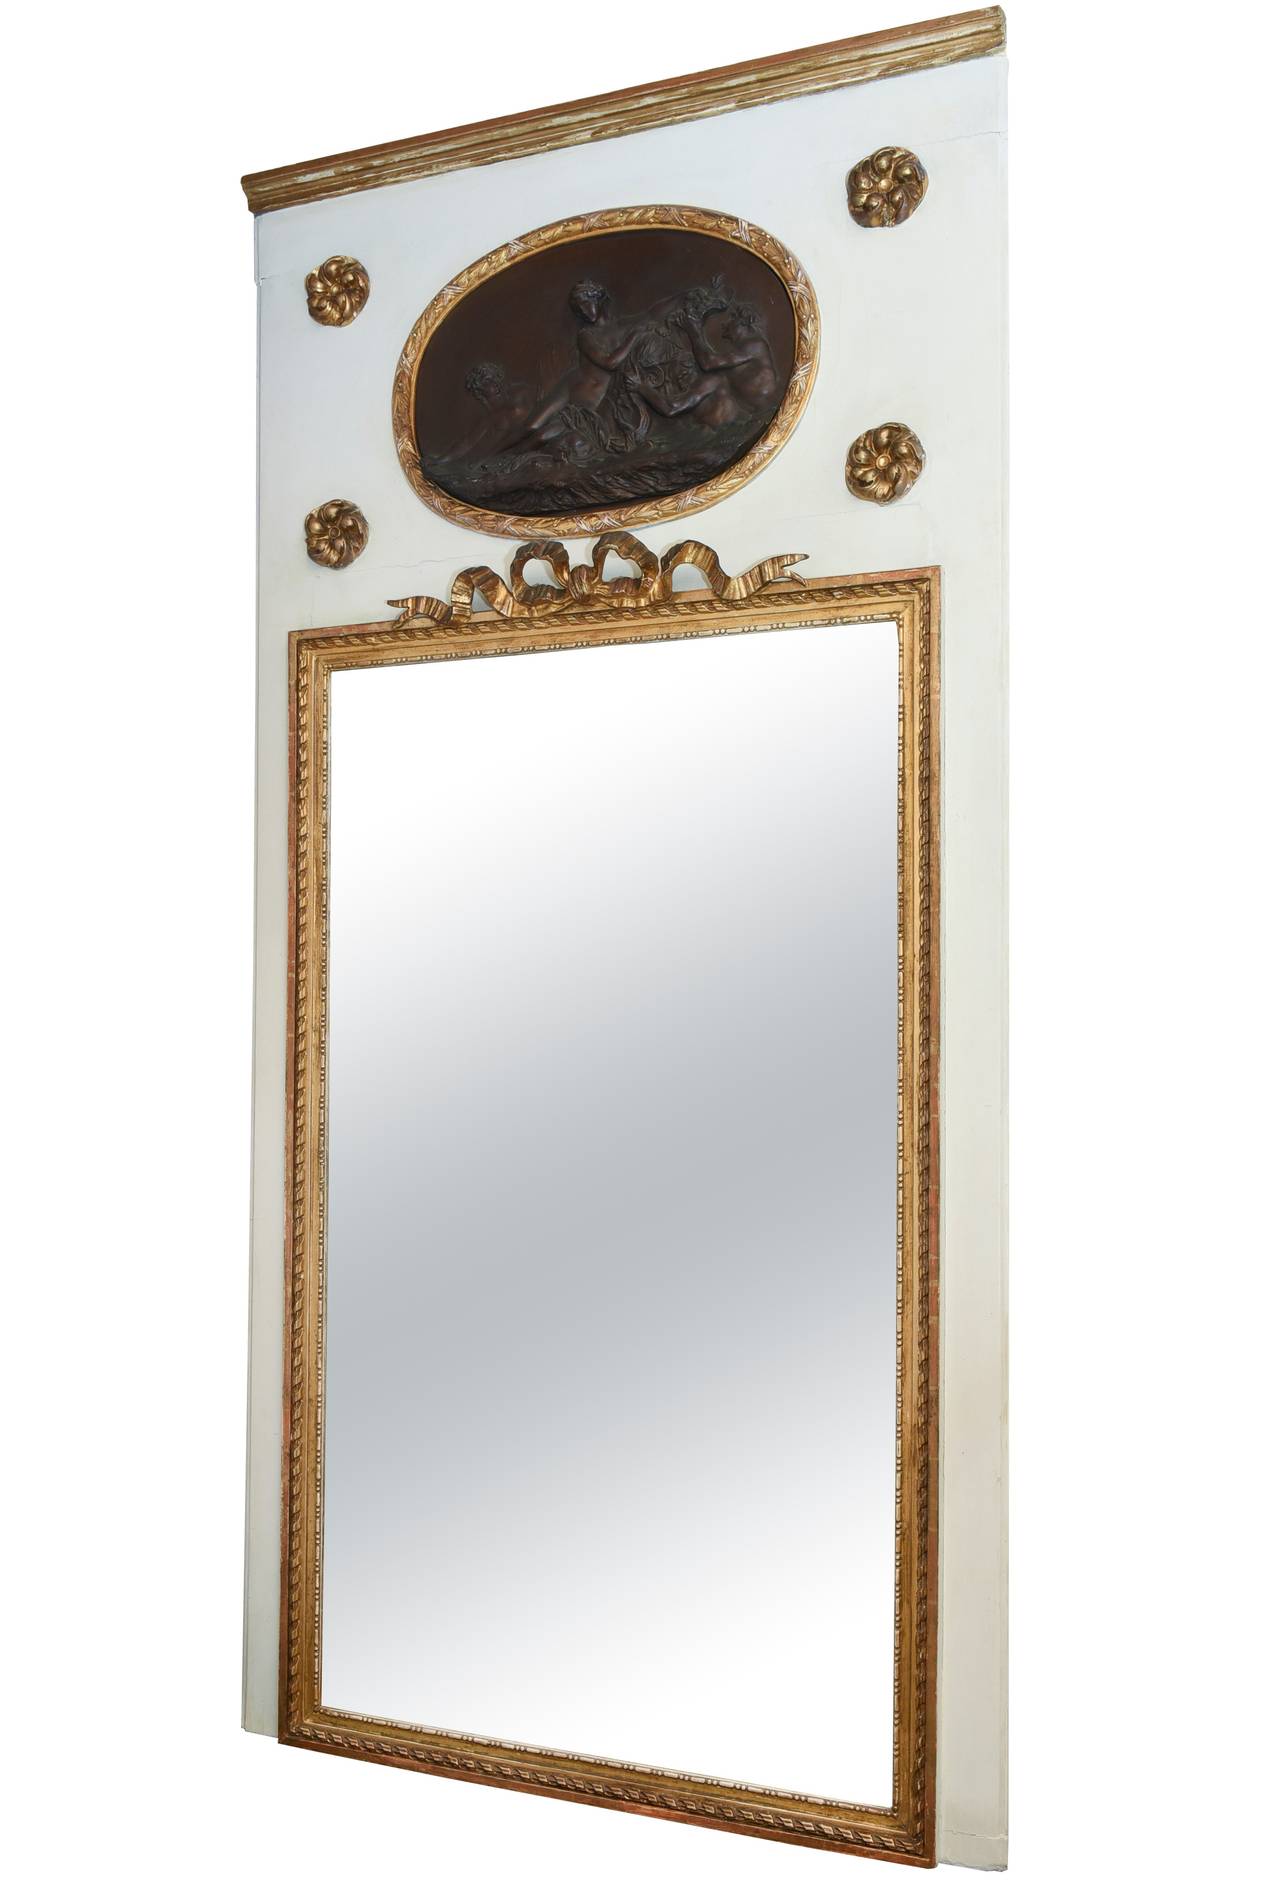 19th Century Monumental Trumeau Mirror, Inset with Plaque after Clodion For Sale